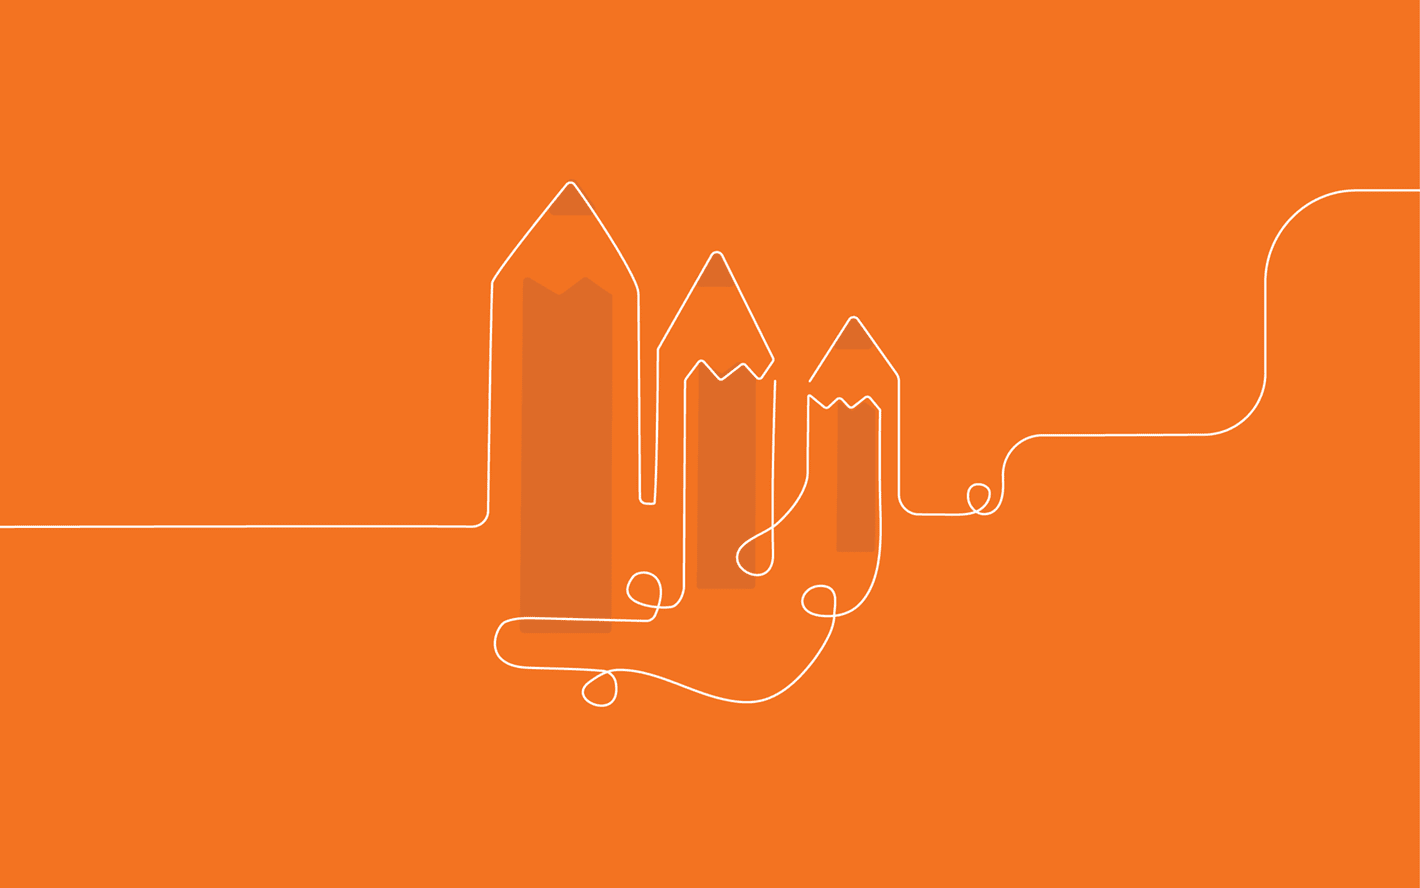 Graphic illustration of three stylized pencils connected by a continuous line on an orange background.